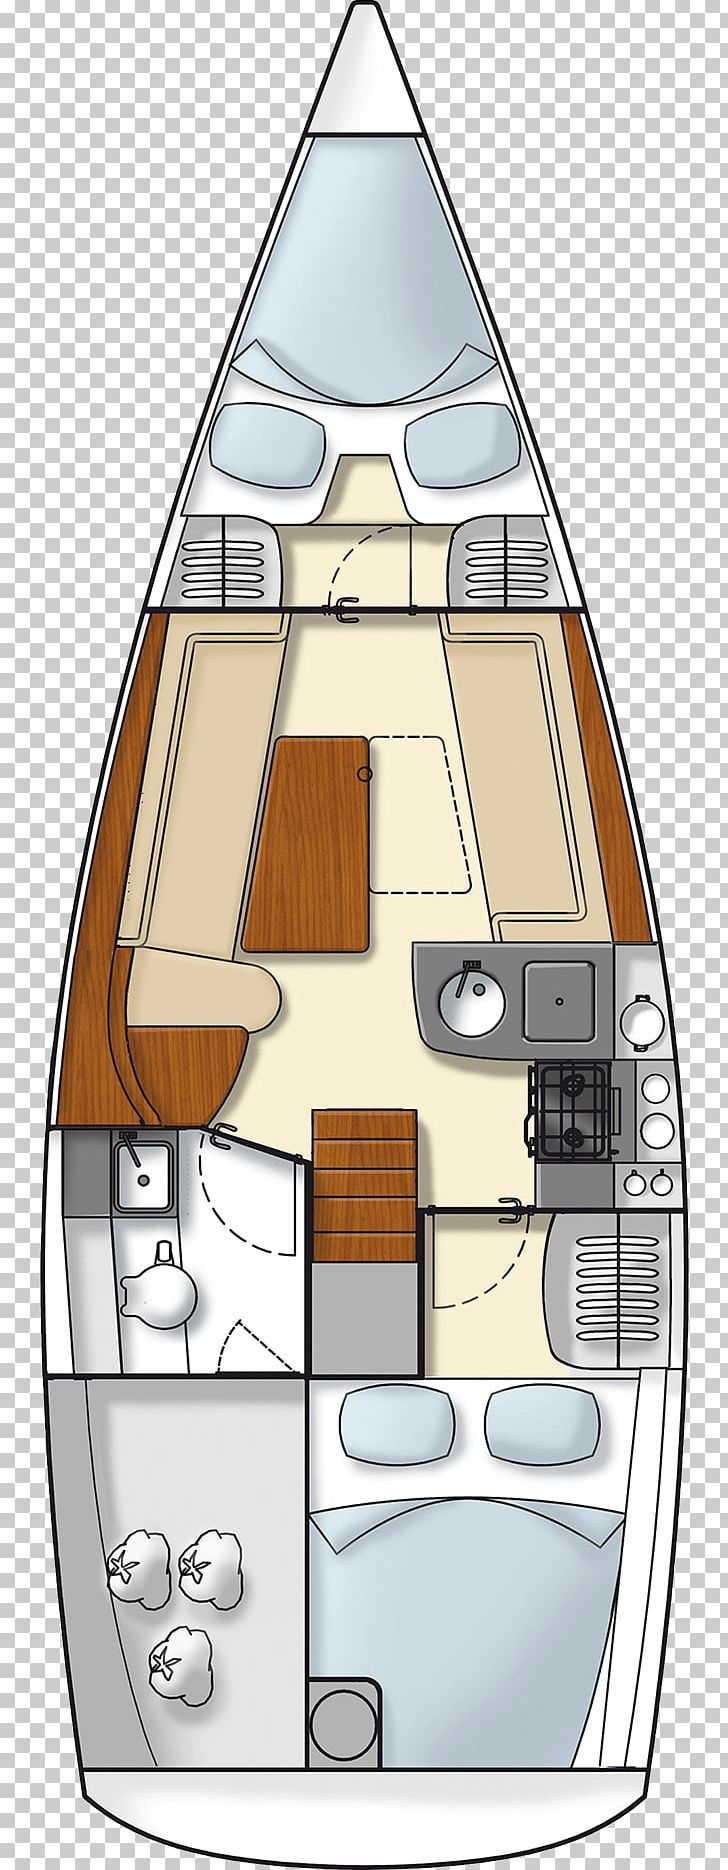 Yacht Komolac Hanseatic League Chartering Boat PNG, Clipart, Bareboat Charter, Berth, Boat, Chartering, Dubrovnik Free PNG Download